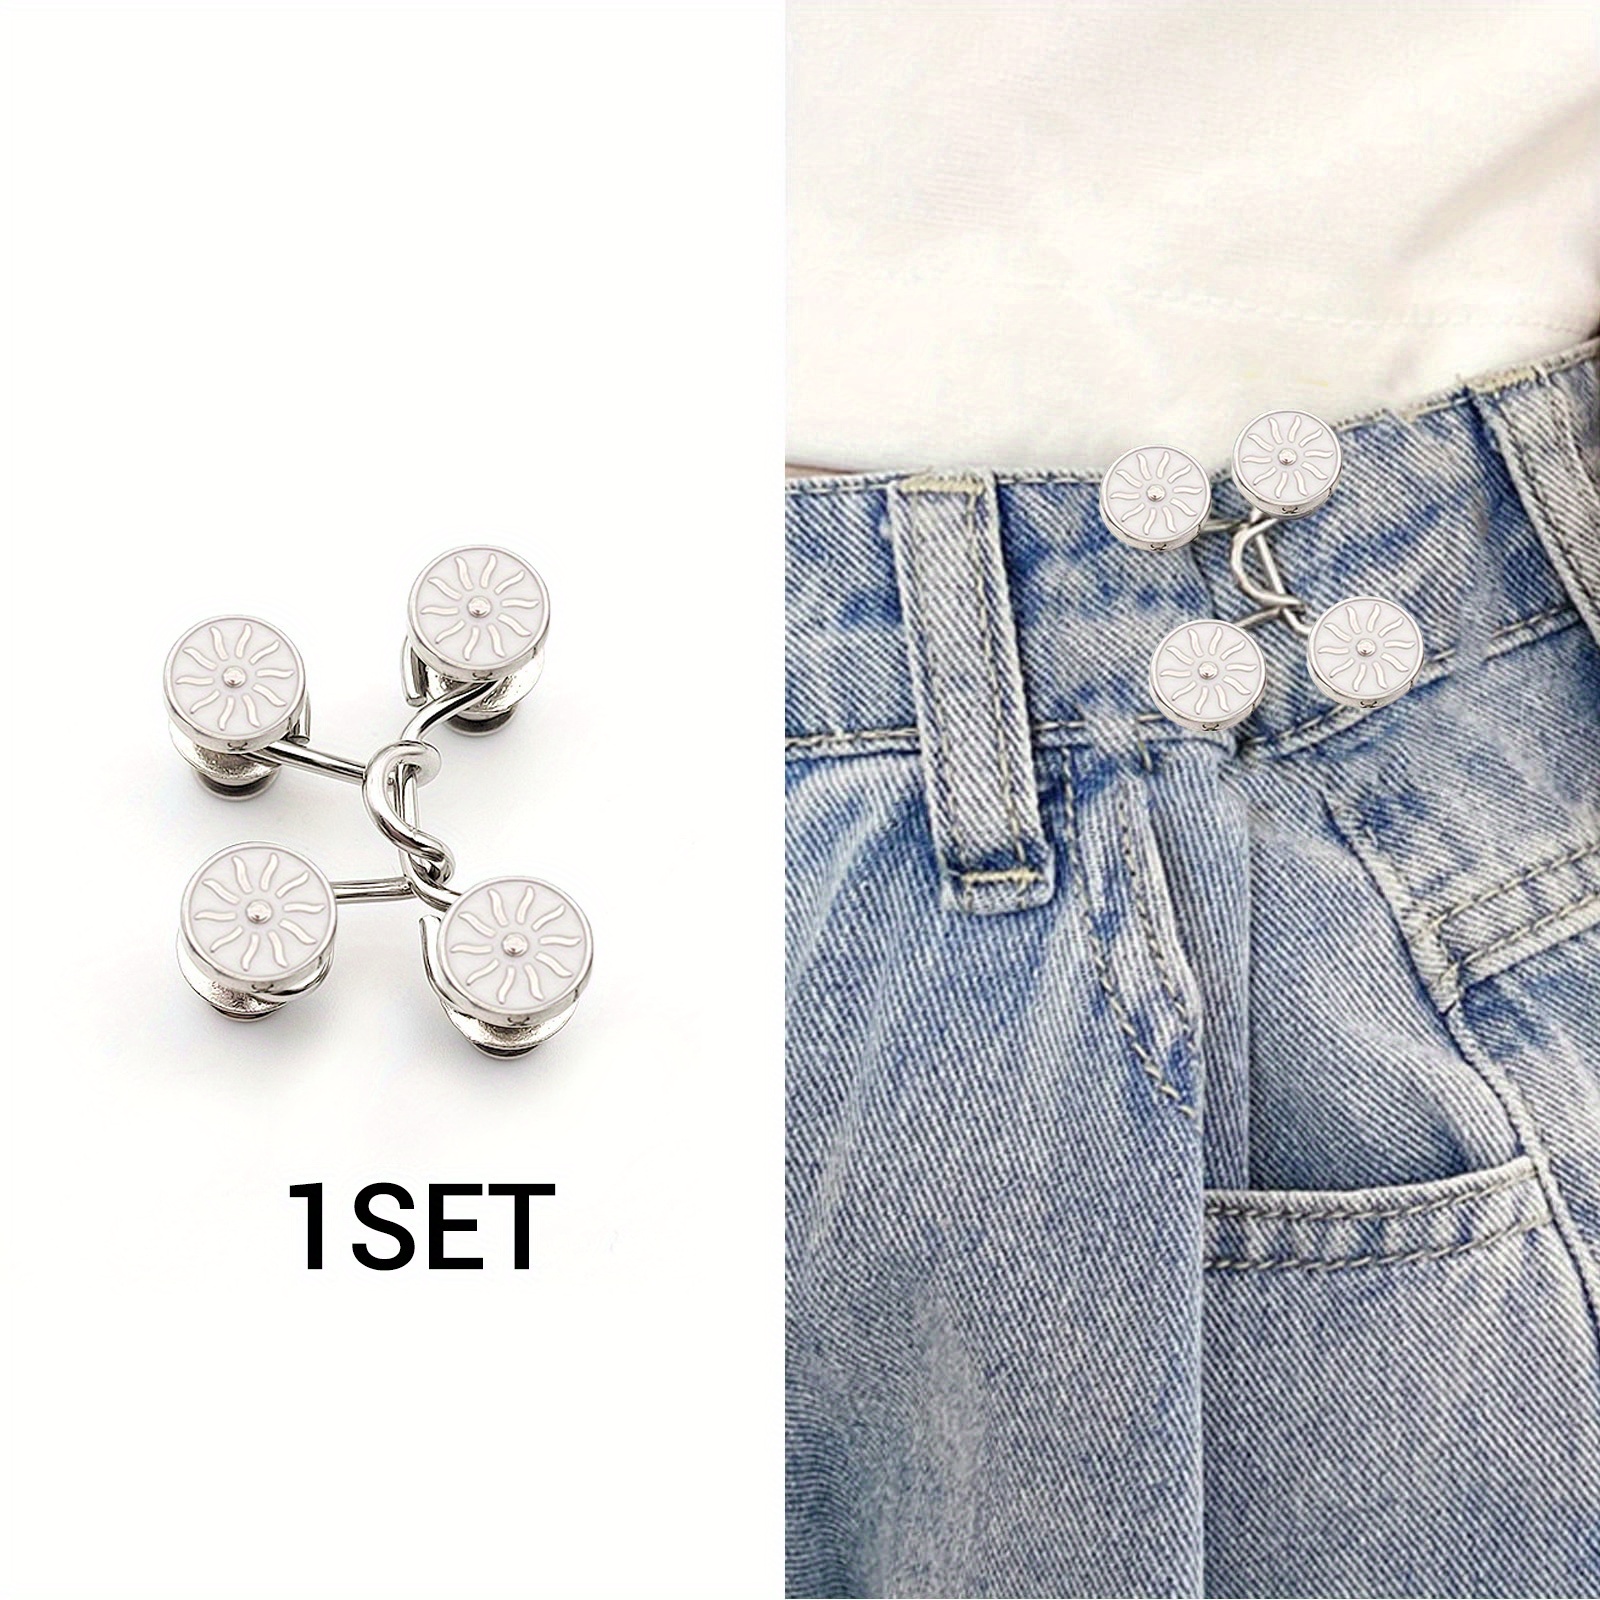 Pant Waist Tightener Instant Jean Buttons For Loose Jeans - Temu Italy